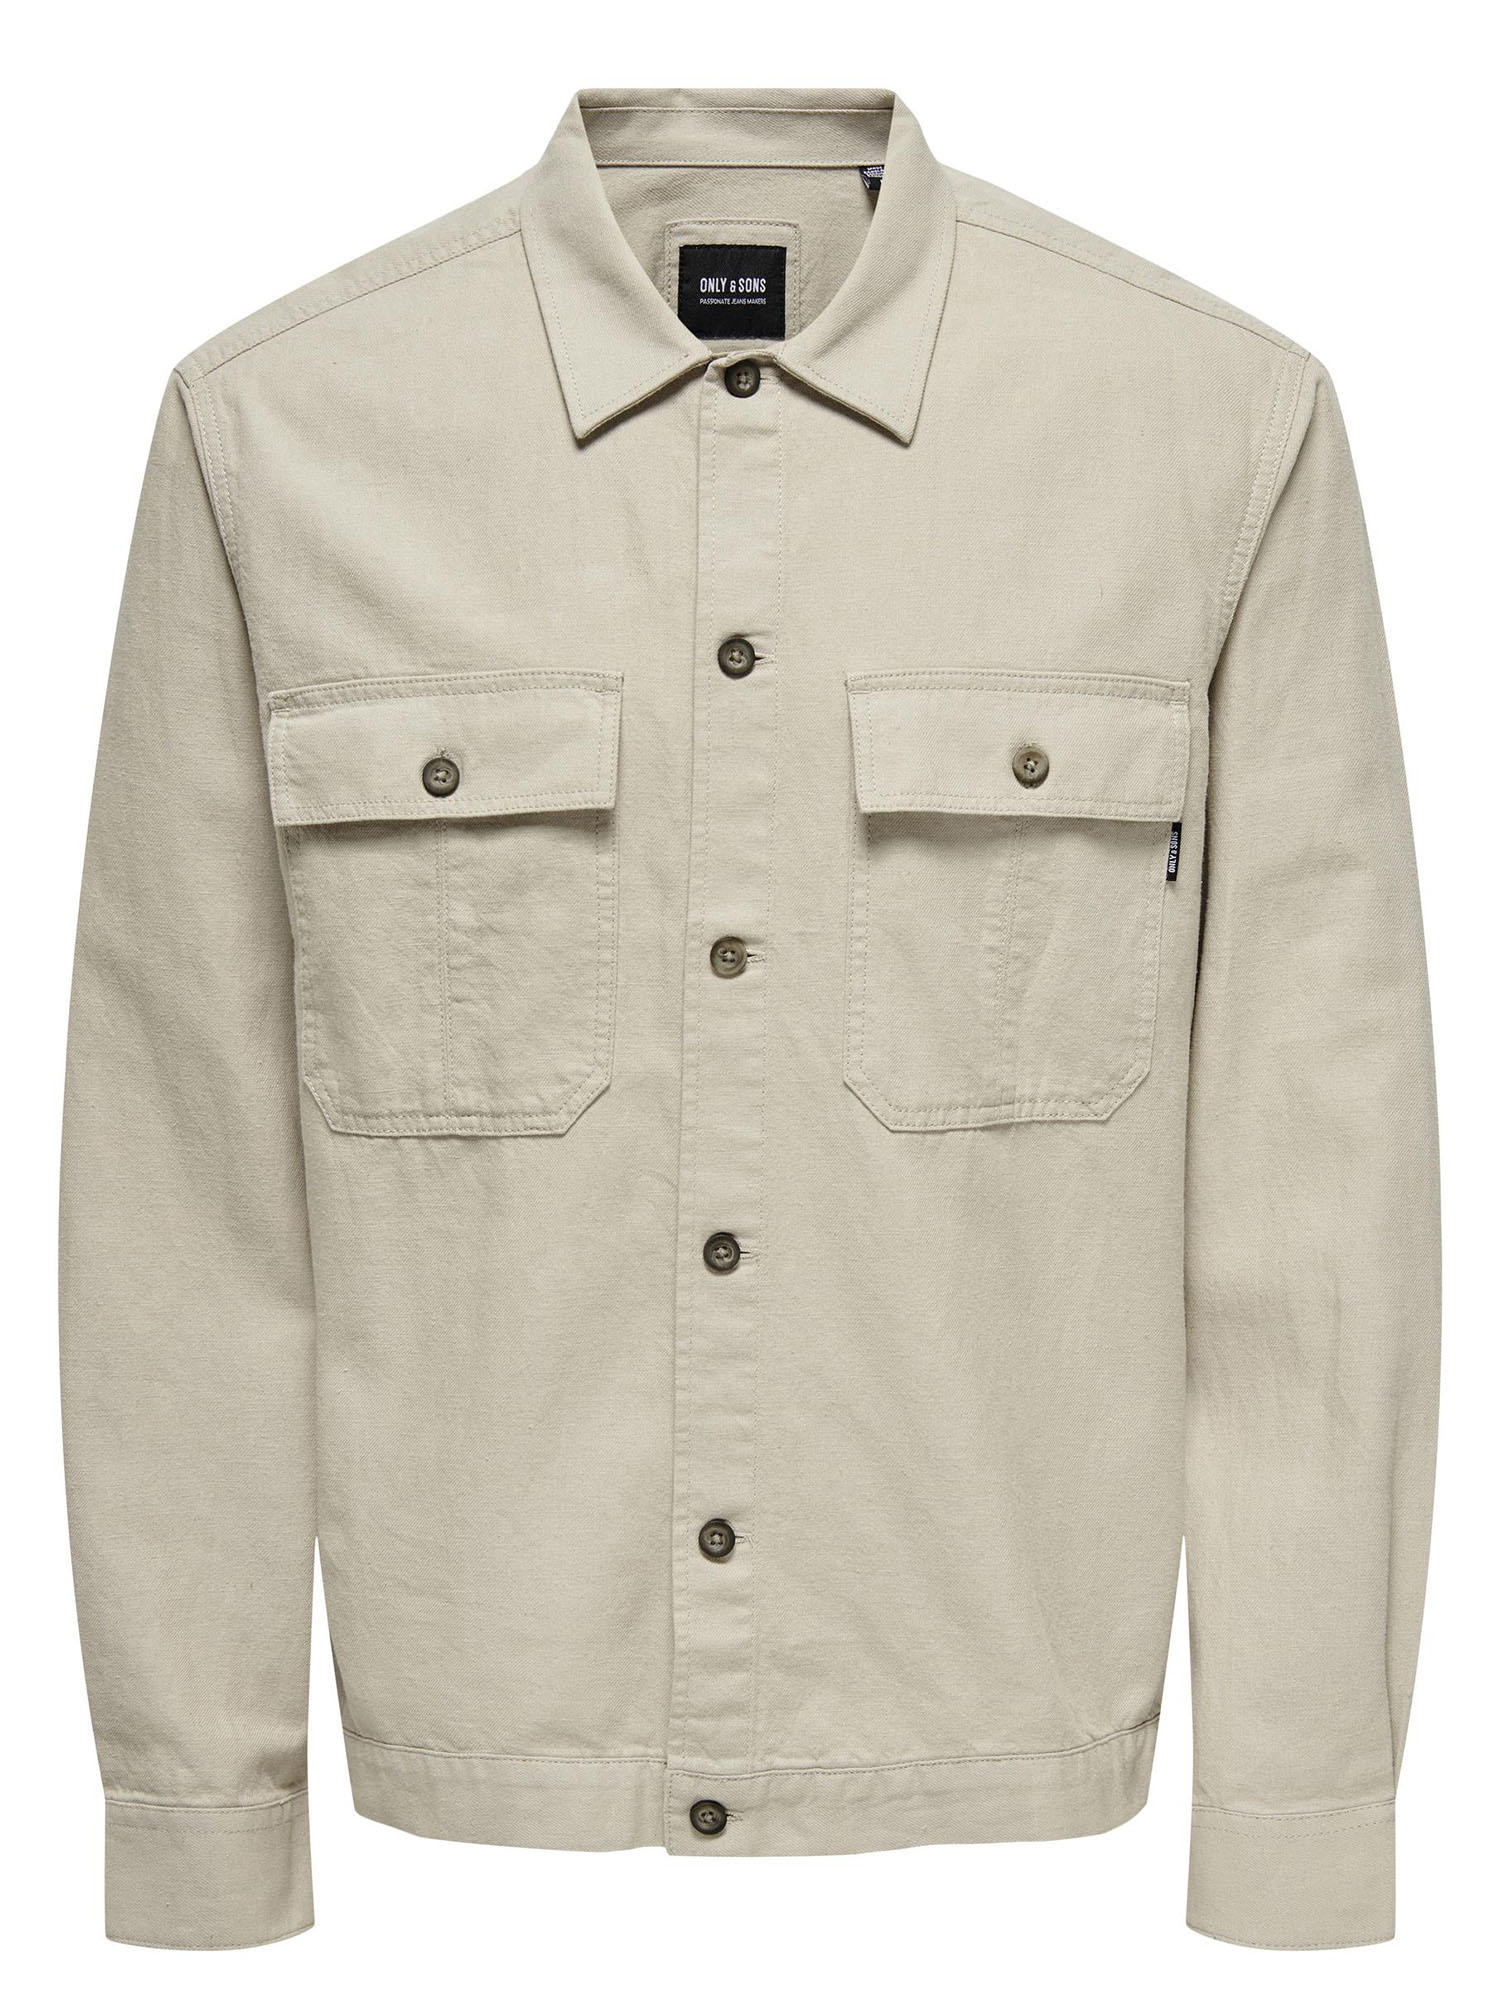 ONLY&SONS N. KENNET - BEIGE